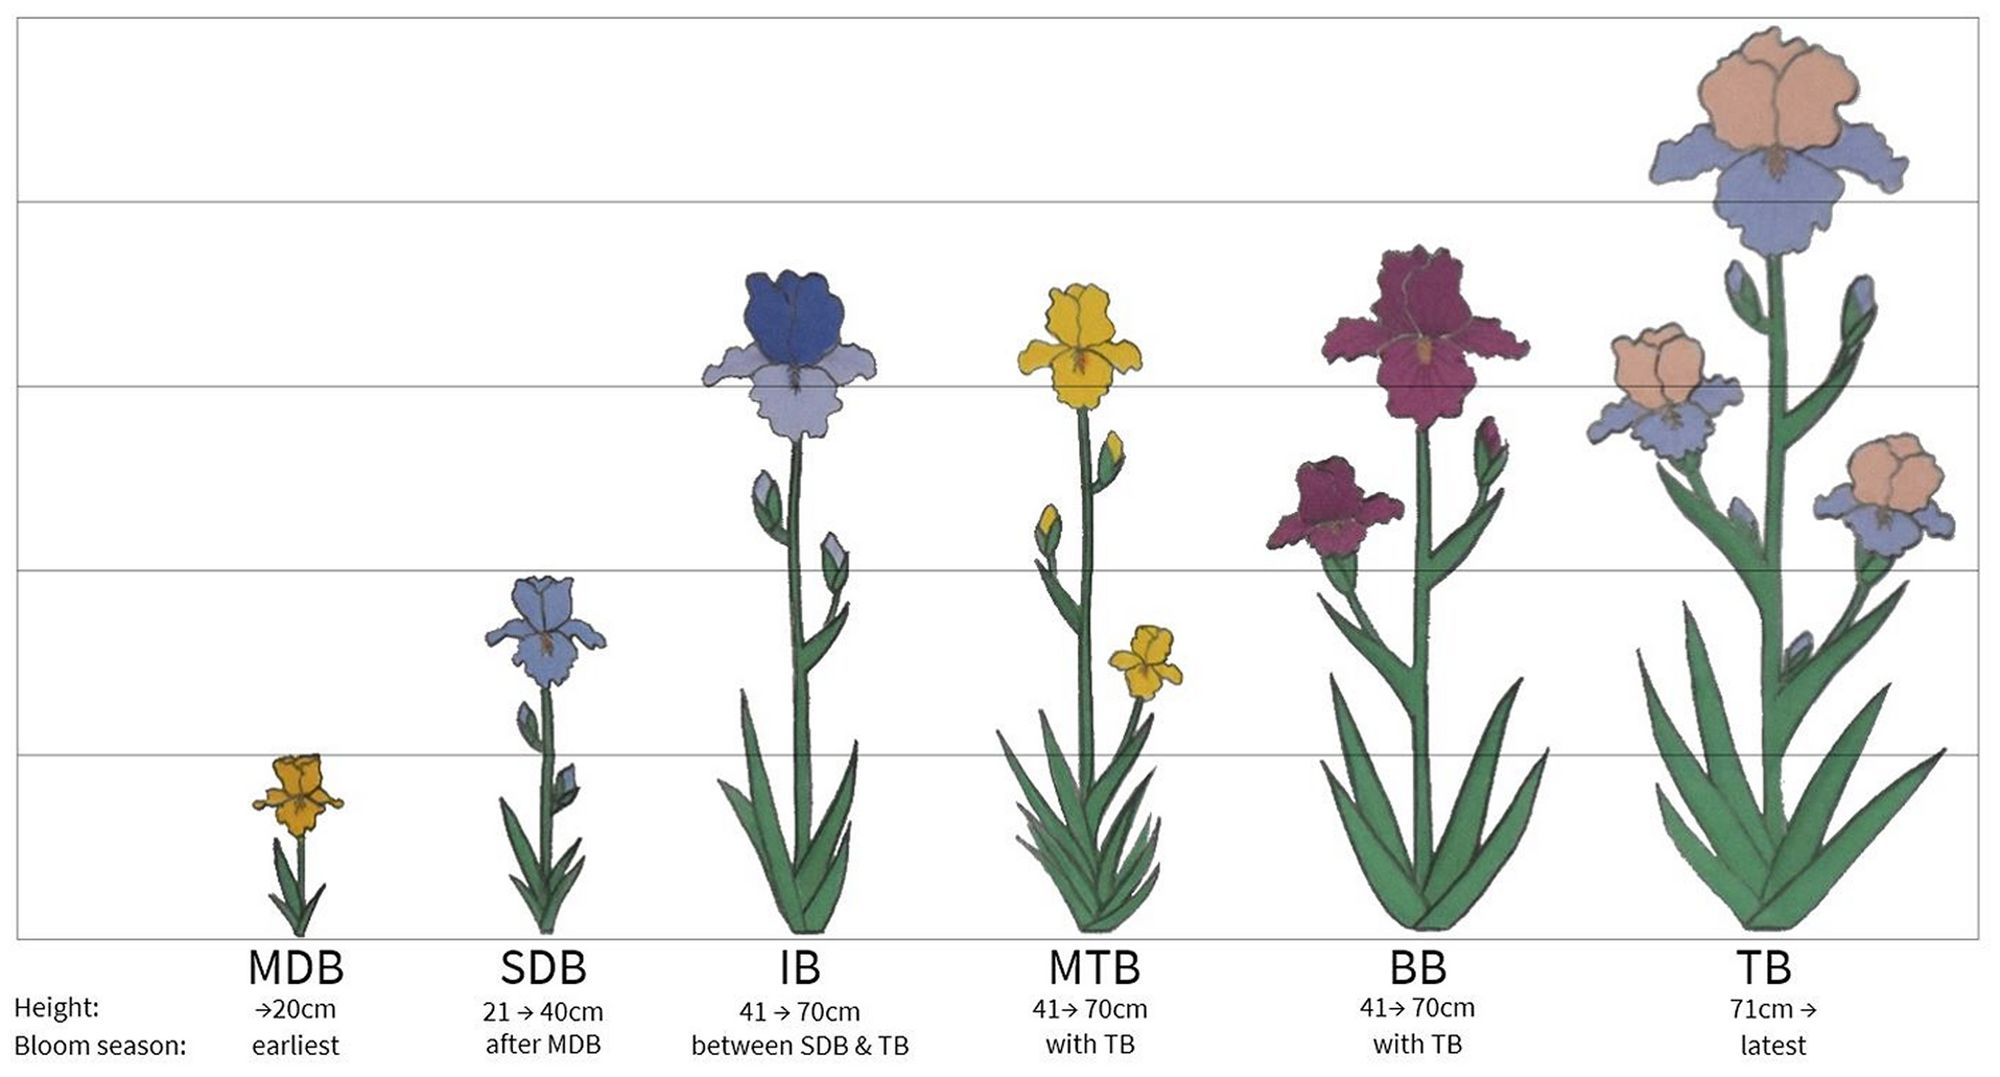 the different types of bearded iris flowers explained..